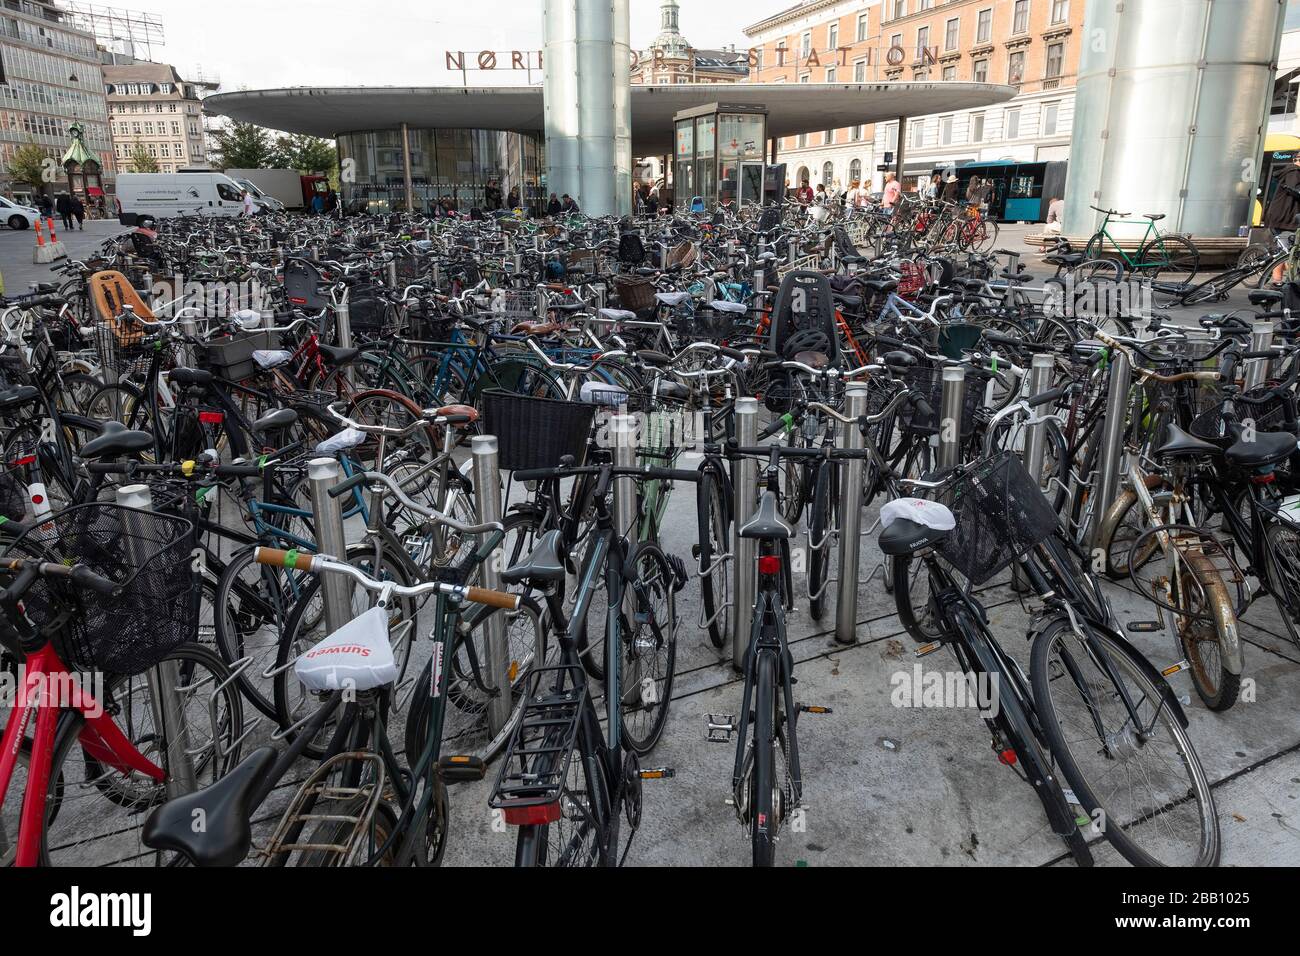 Bicycle parking outside the Nørreport Station S-train, metro and main line railway station in Copenhagen, Denmark, Europe Stock Photo